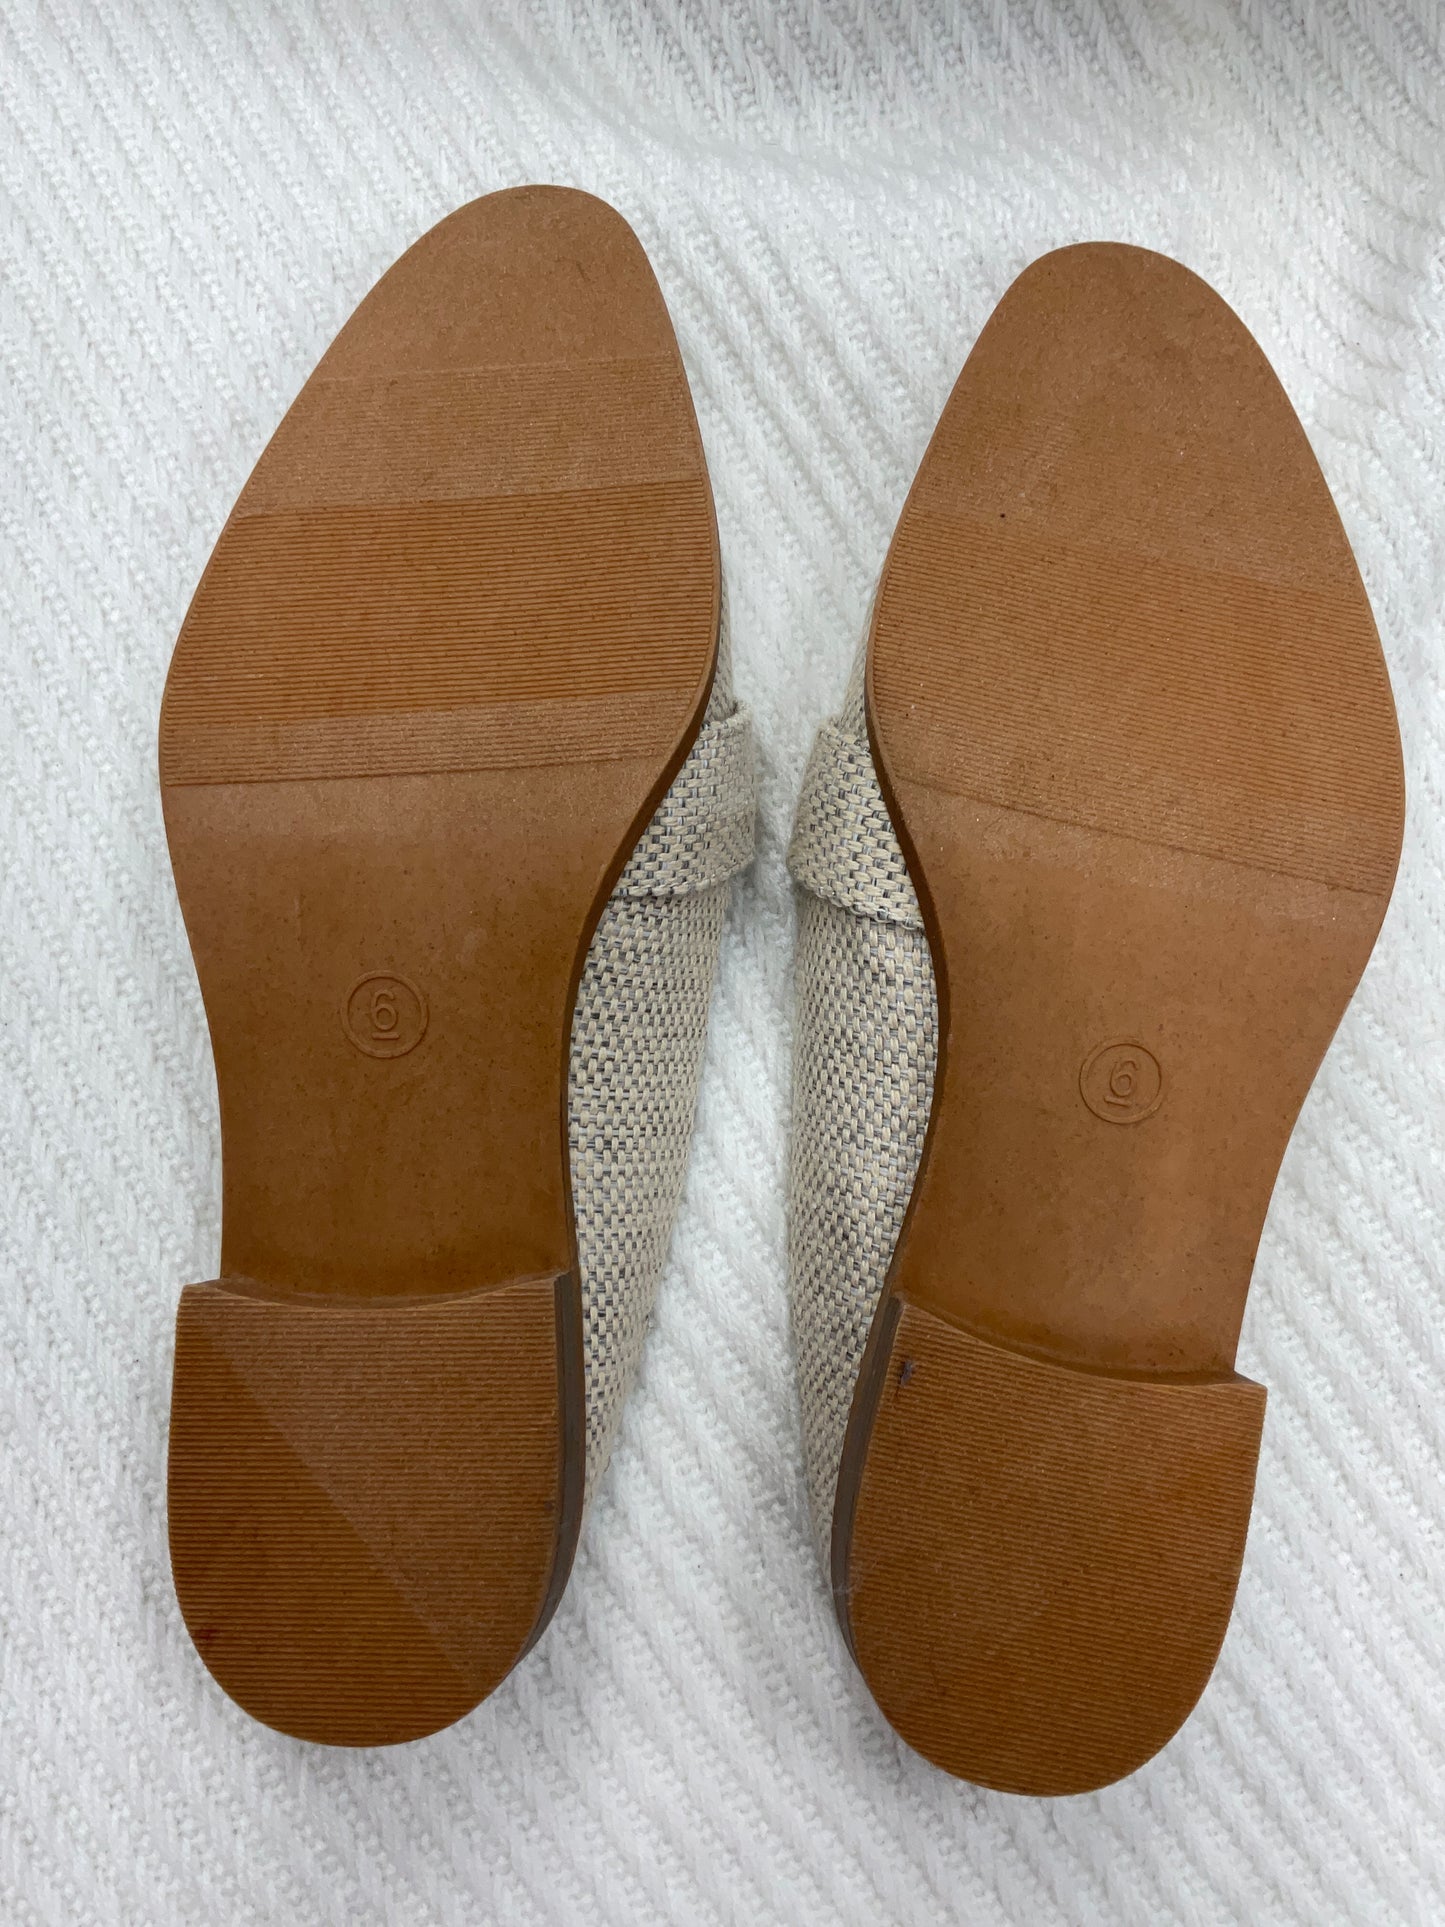 Shoes Flats By Universal Thread  Size: 6